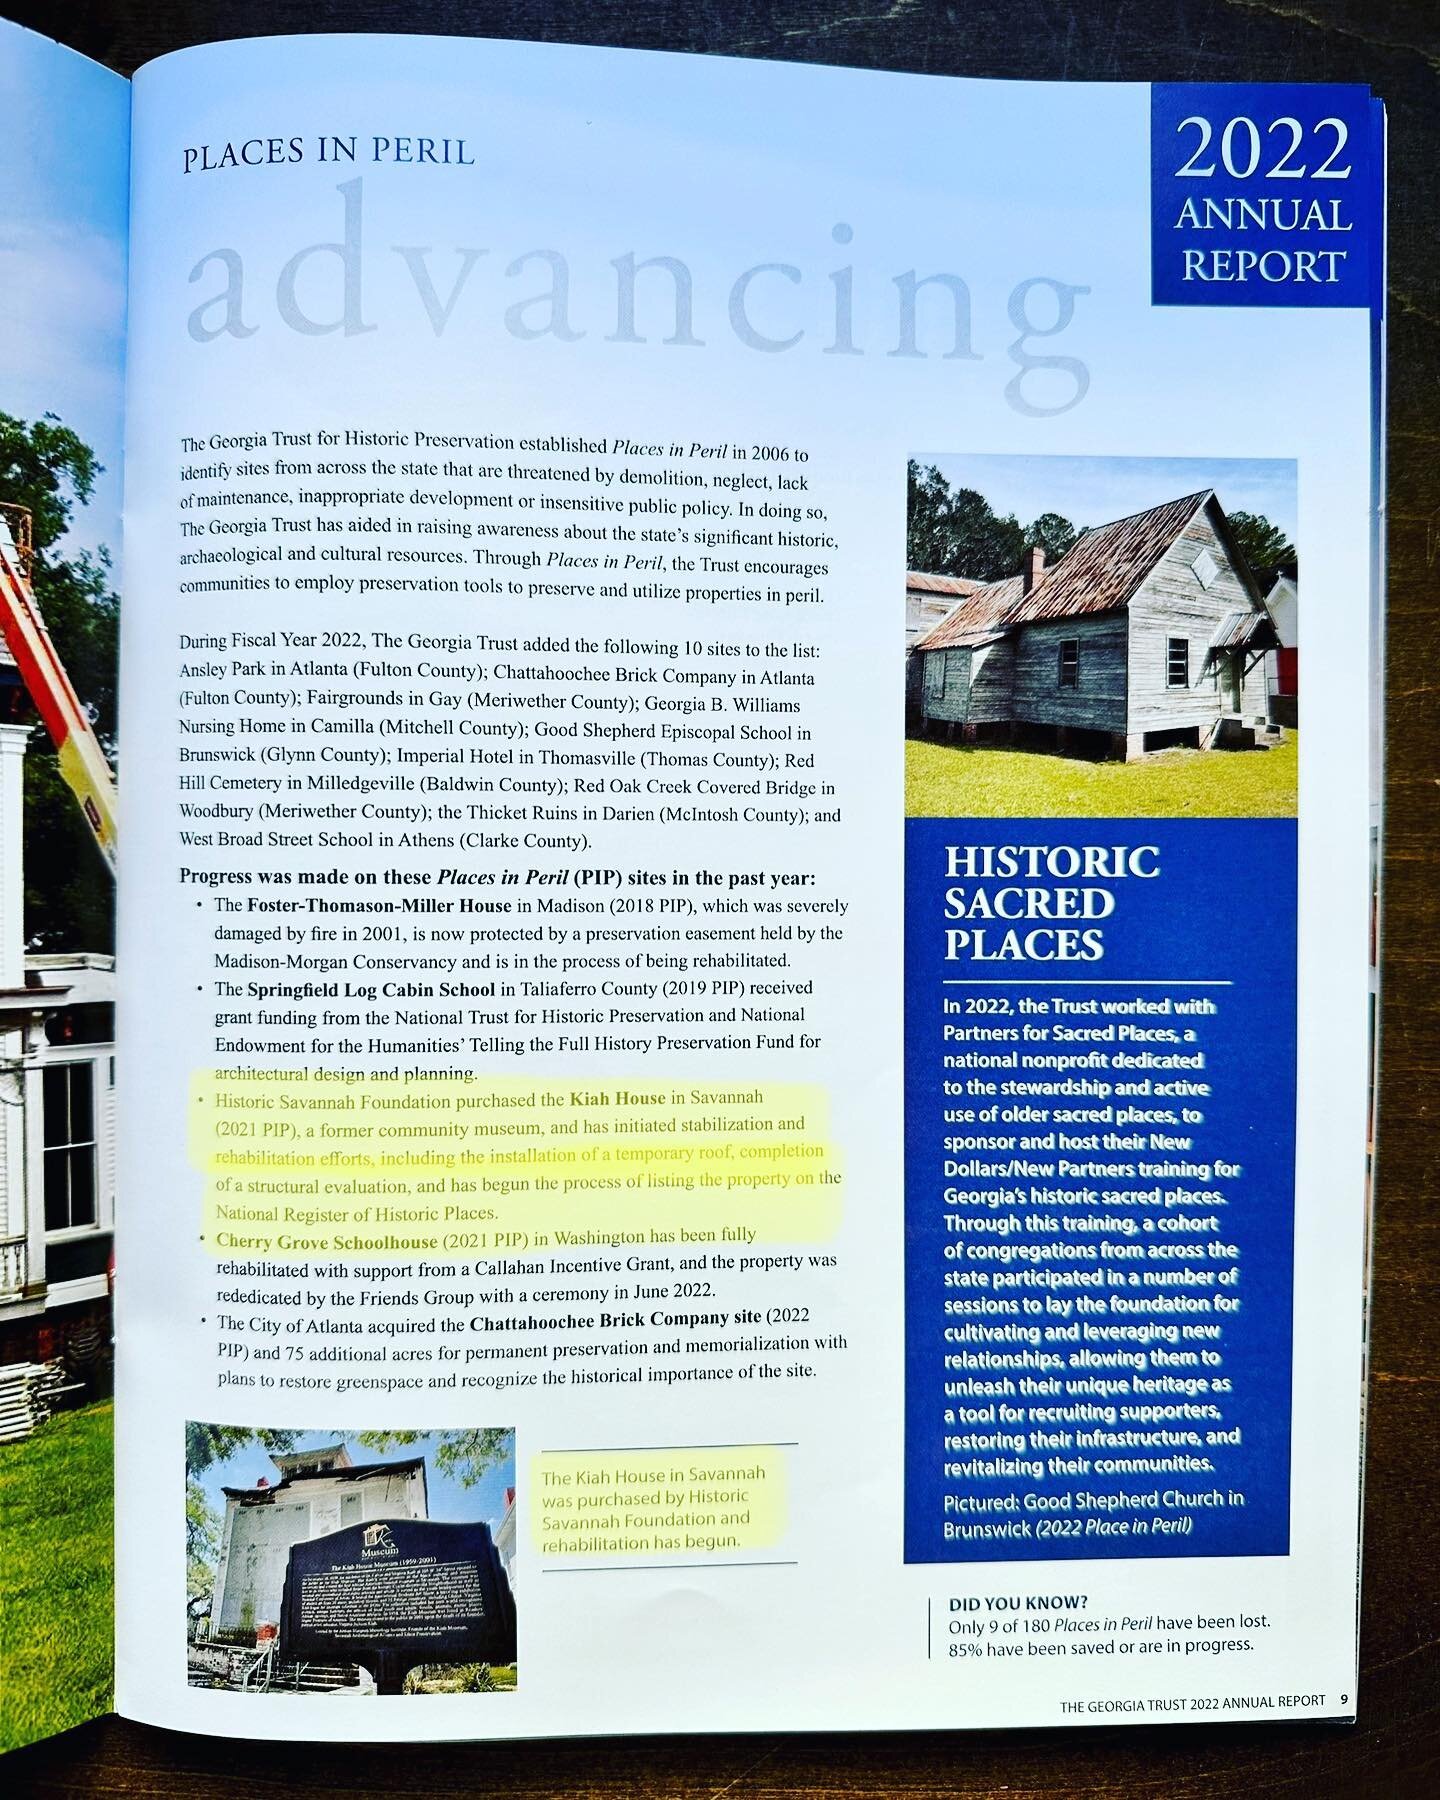 Kiah House update in the recent issue of The Rambler by @thegeorgiatrust!  We are proud to be working with the Historic Savannah Foundation to list this significant property in the National Register of Historic Places.